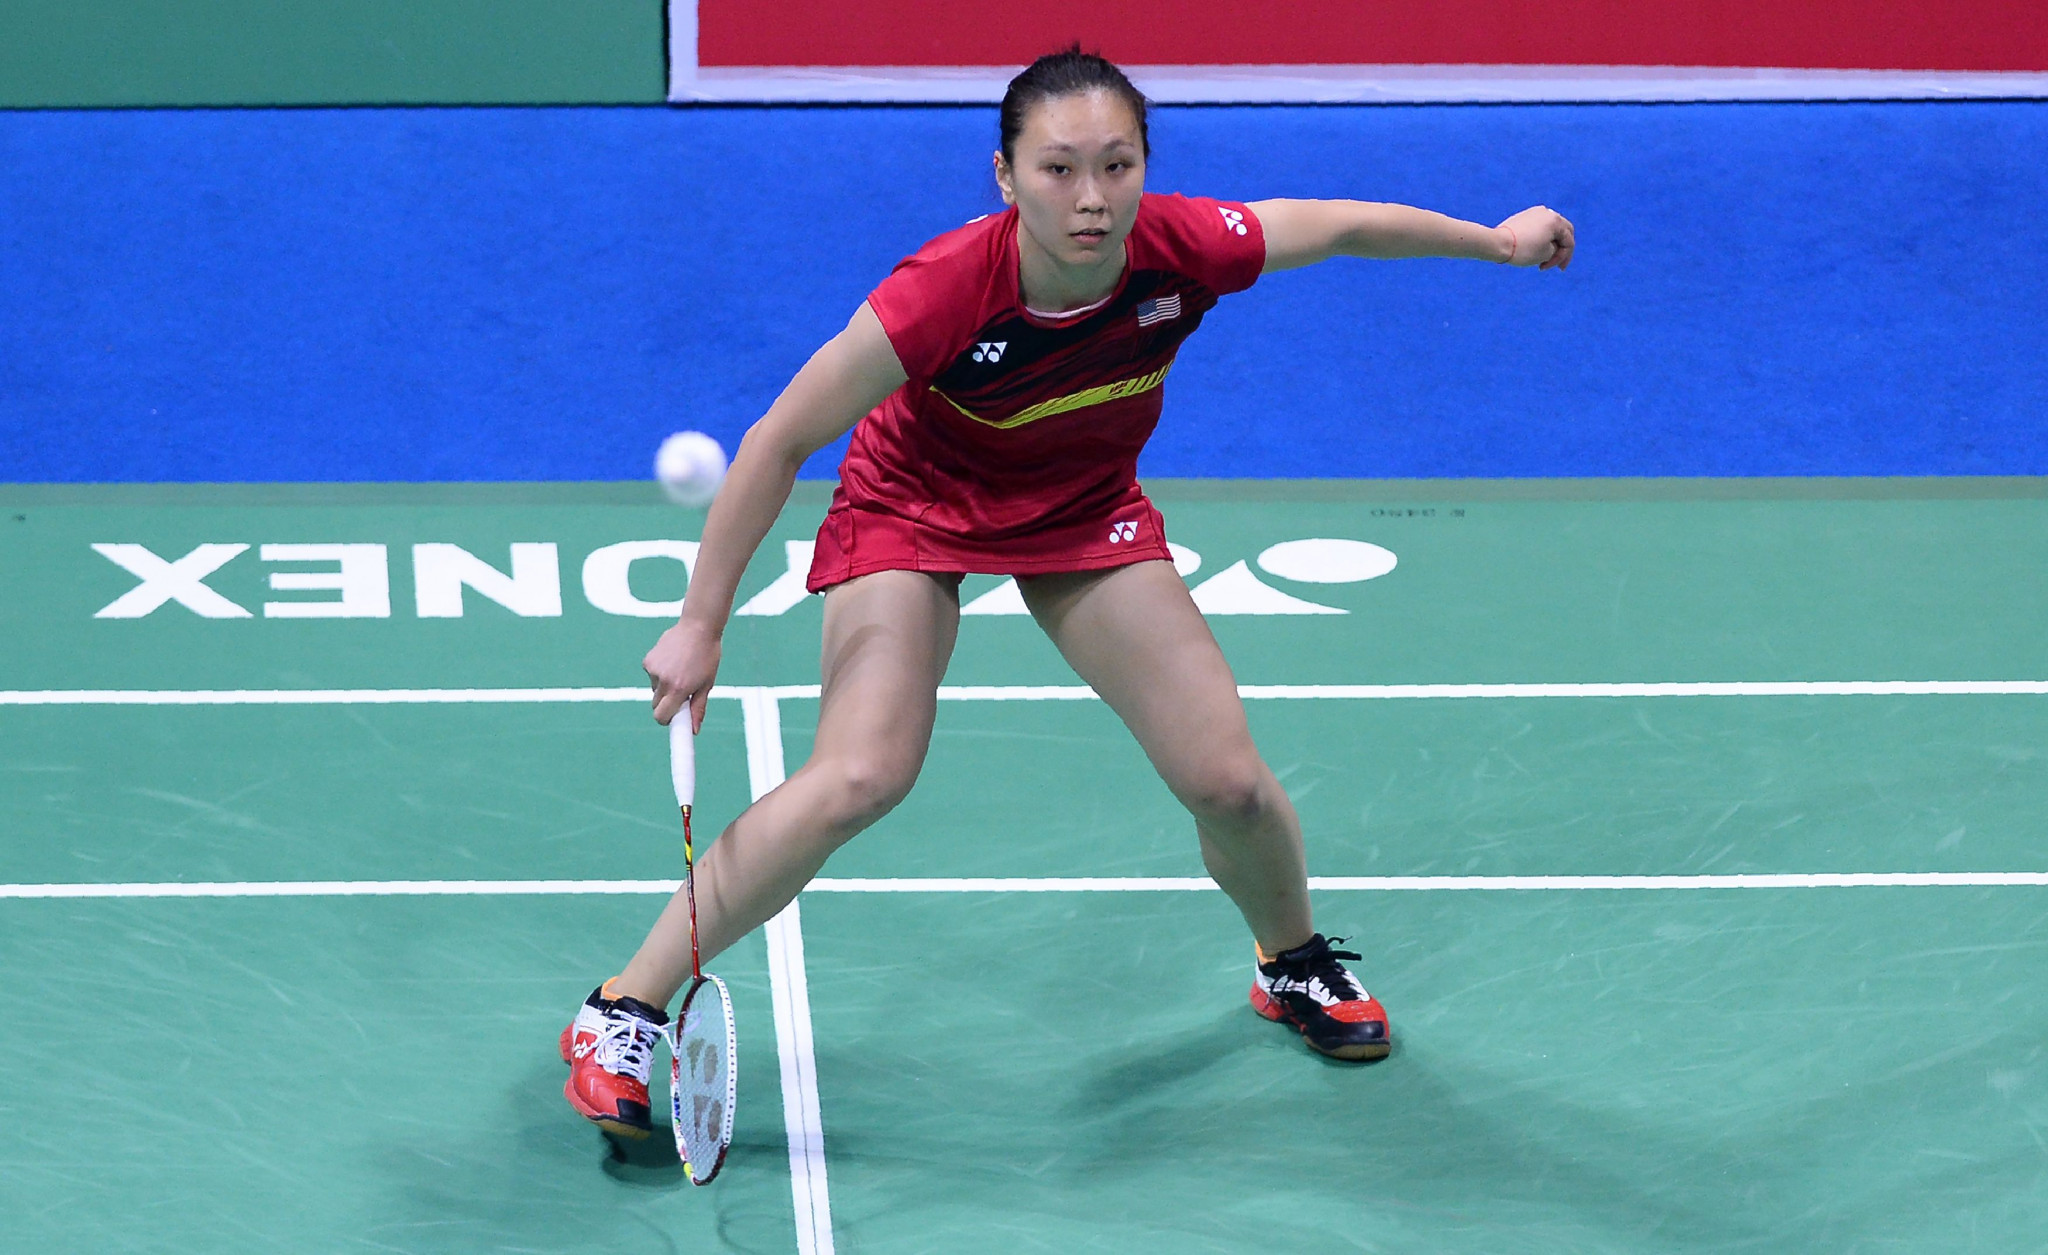 Beiwen Zhang made a strong start in the women's singles event ©Getty Images